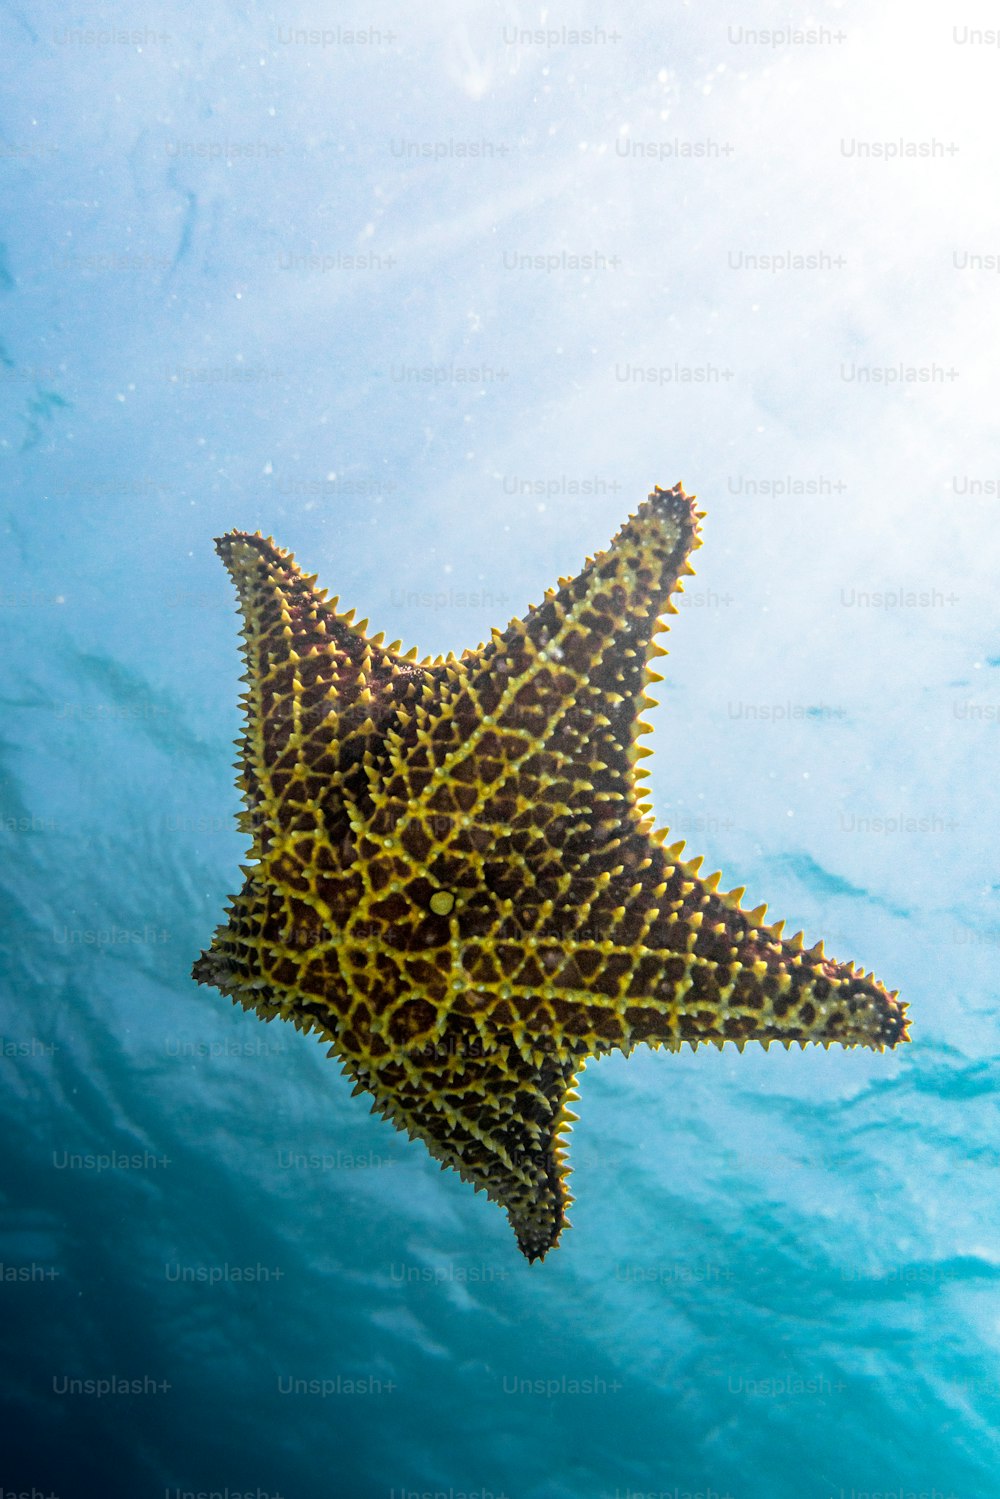 a starfish swims in the blue water